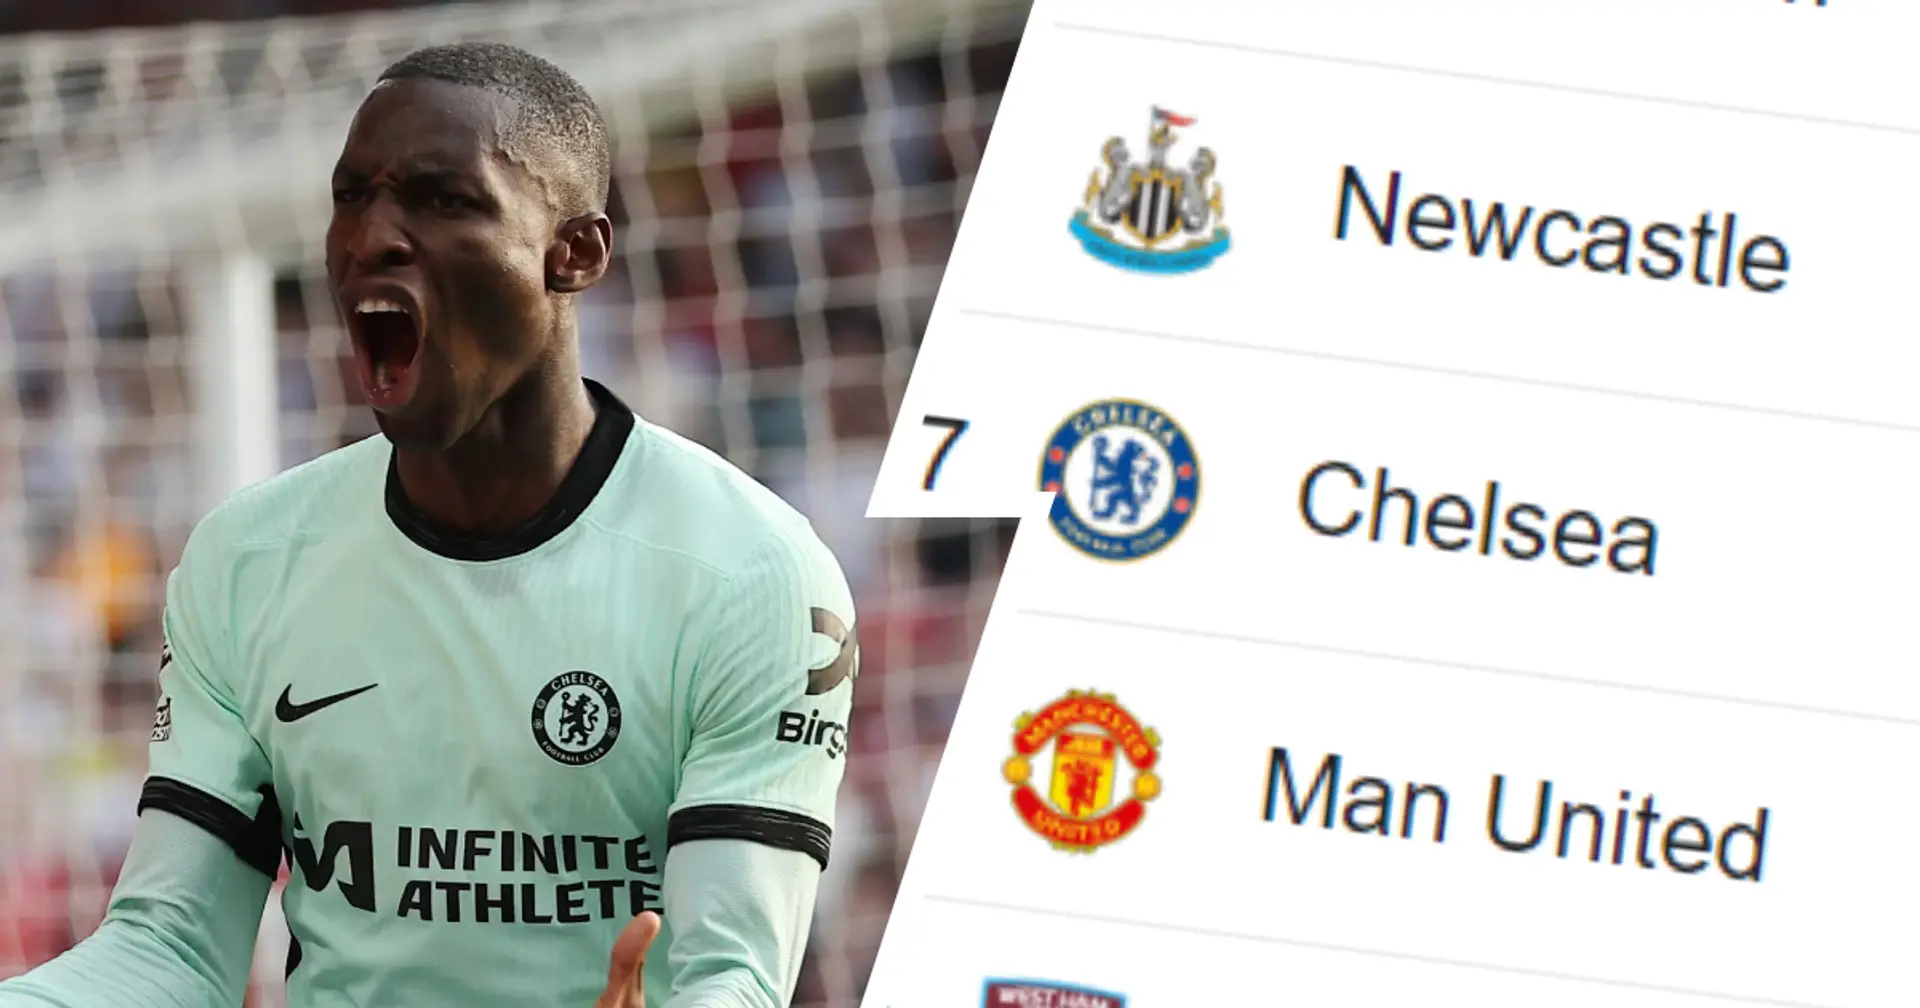 Chelsea and Newcastle gain ground: Premier League table update ahead of Man United vs Arsenal